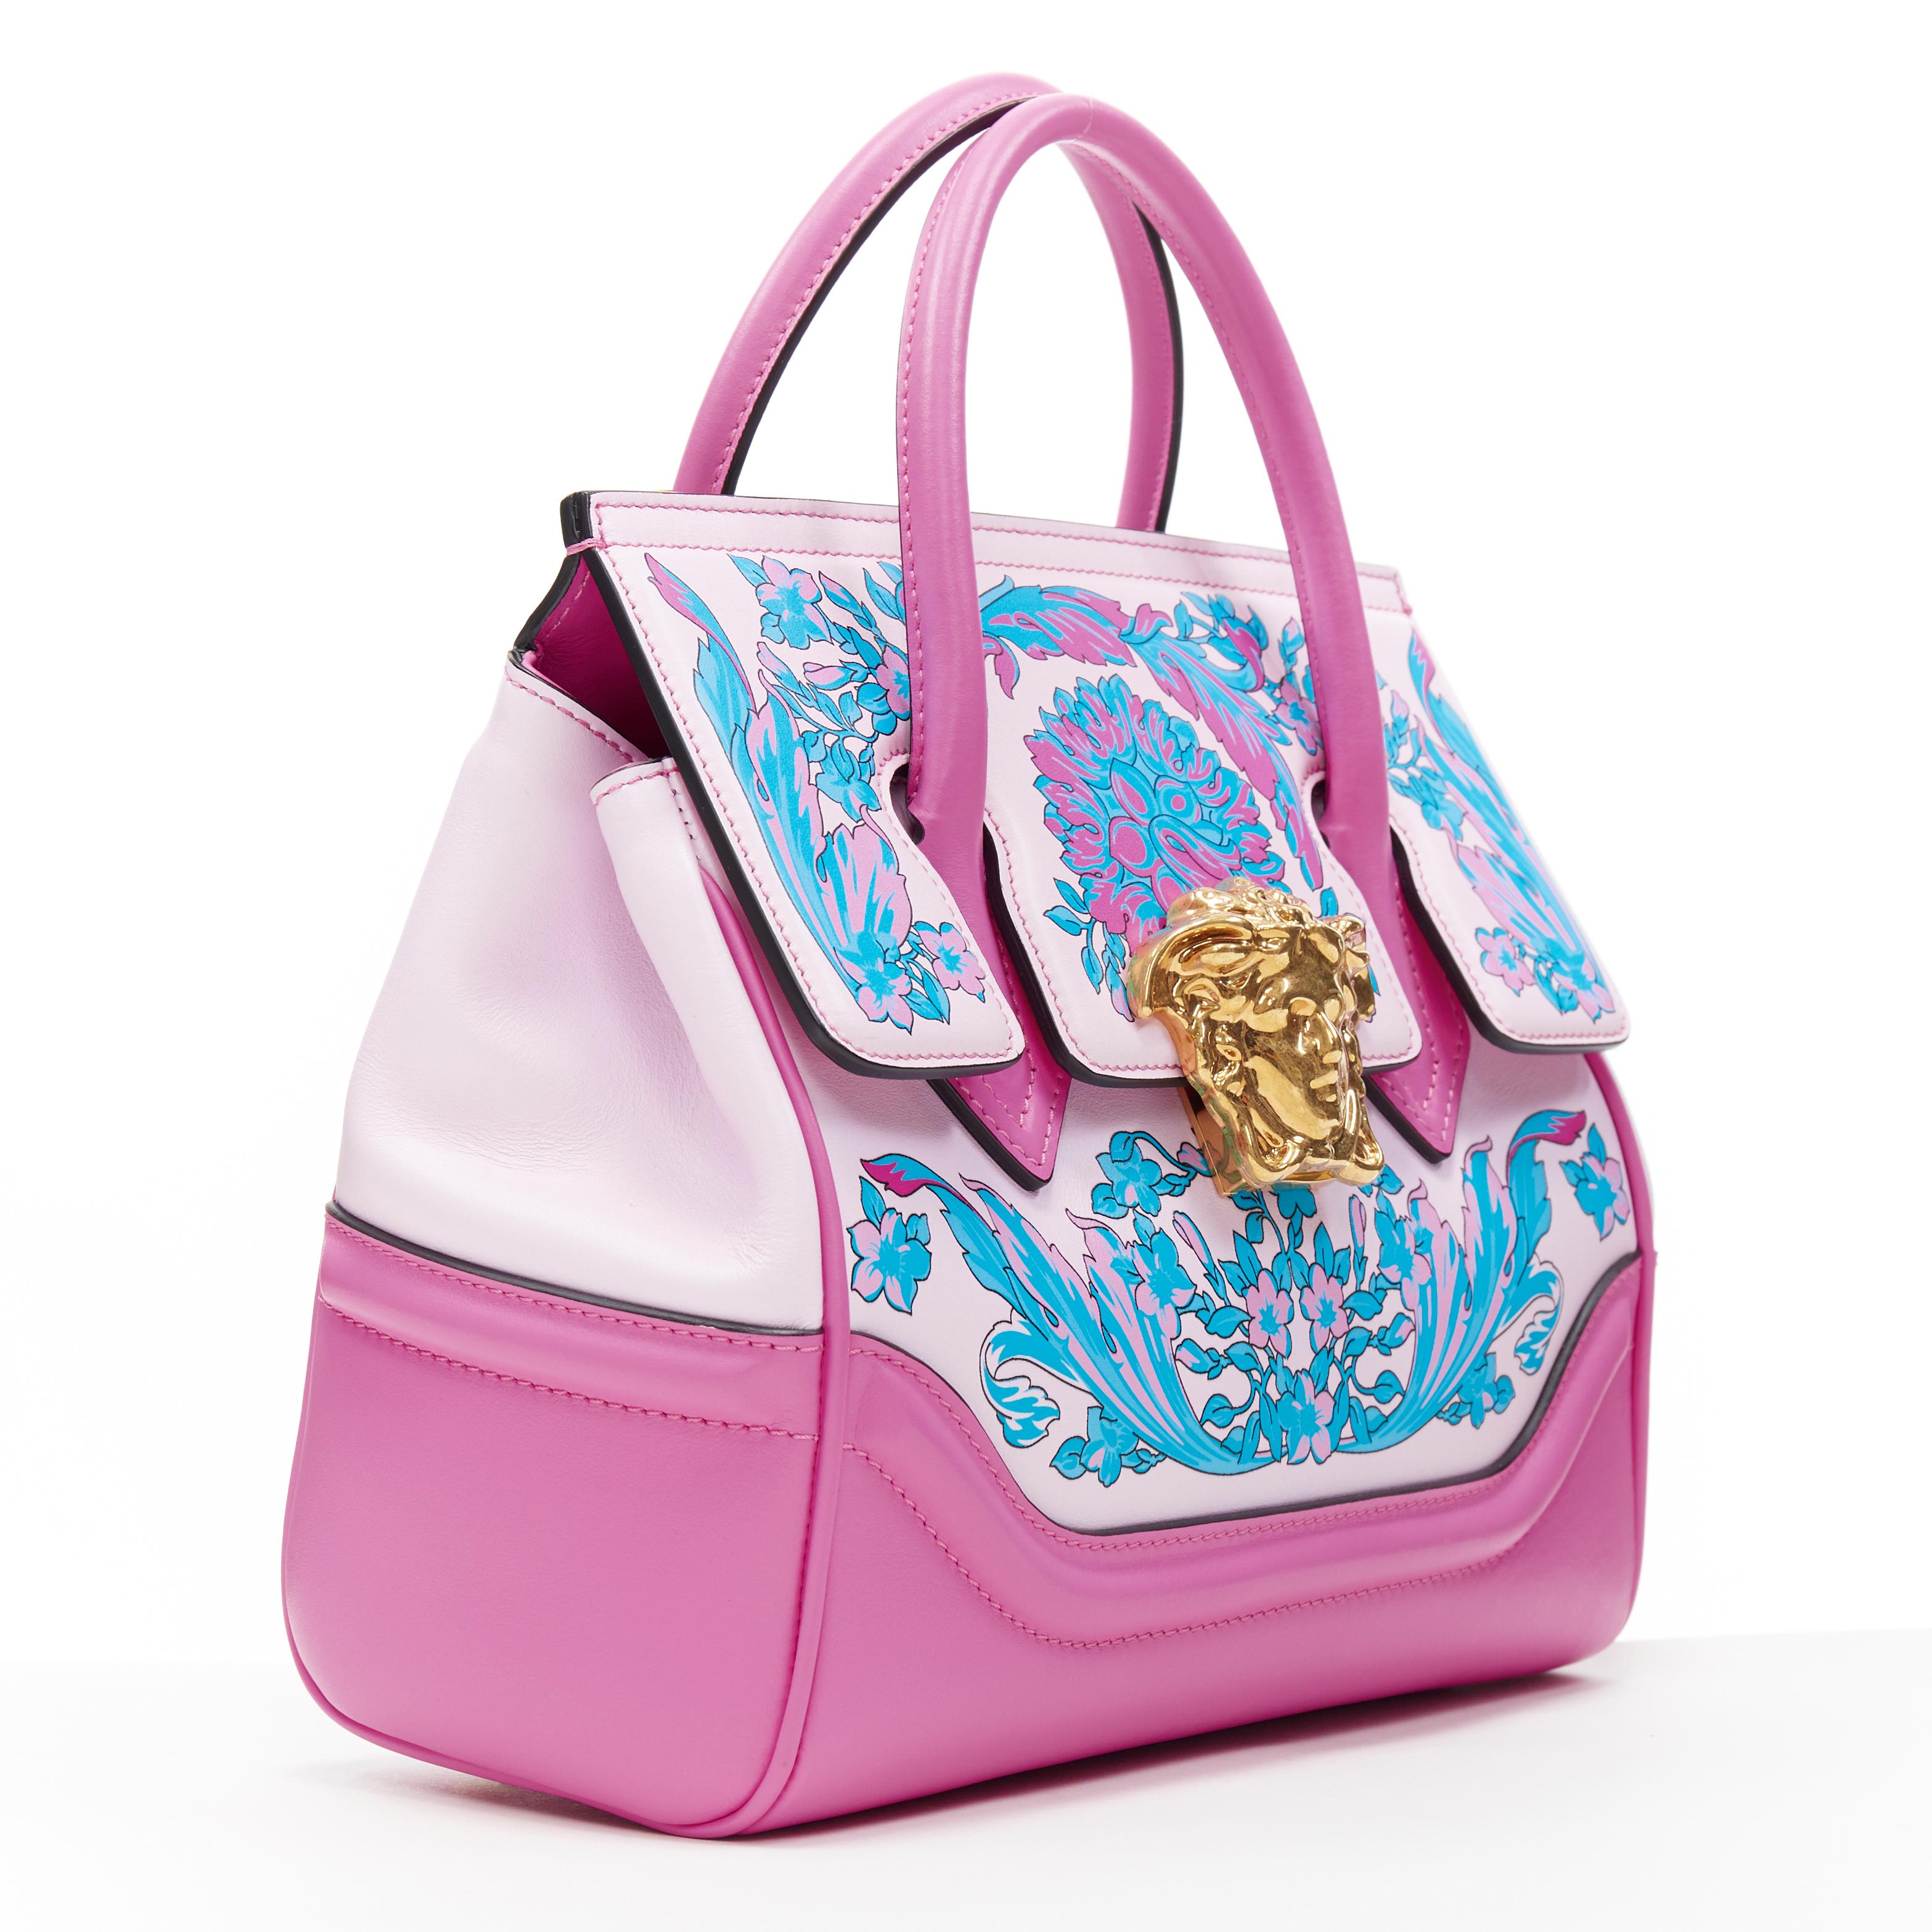 new VERSACE 2019 Palazzo Empire Small Technicolor Baroque pink Medusa bag
Brand: Versace
Designer: Donatella Versace
Collection: Spring Summer 2019
Model Name / Style: Versace Empire
Material: Leather
Color: Pink
Pattern: Floral barocco
Closure: